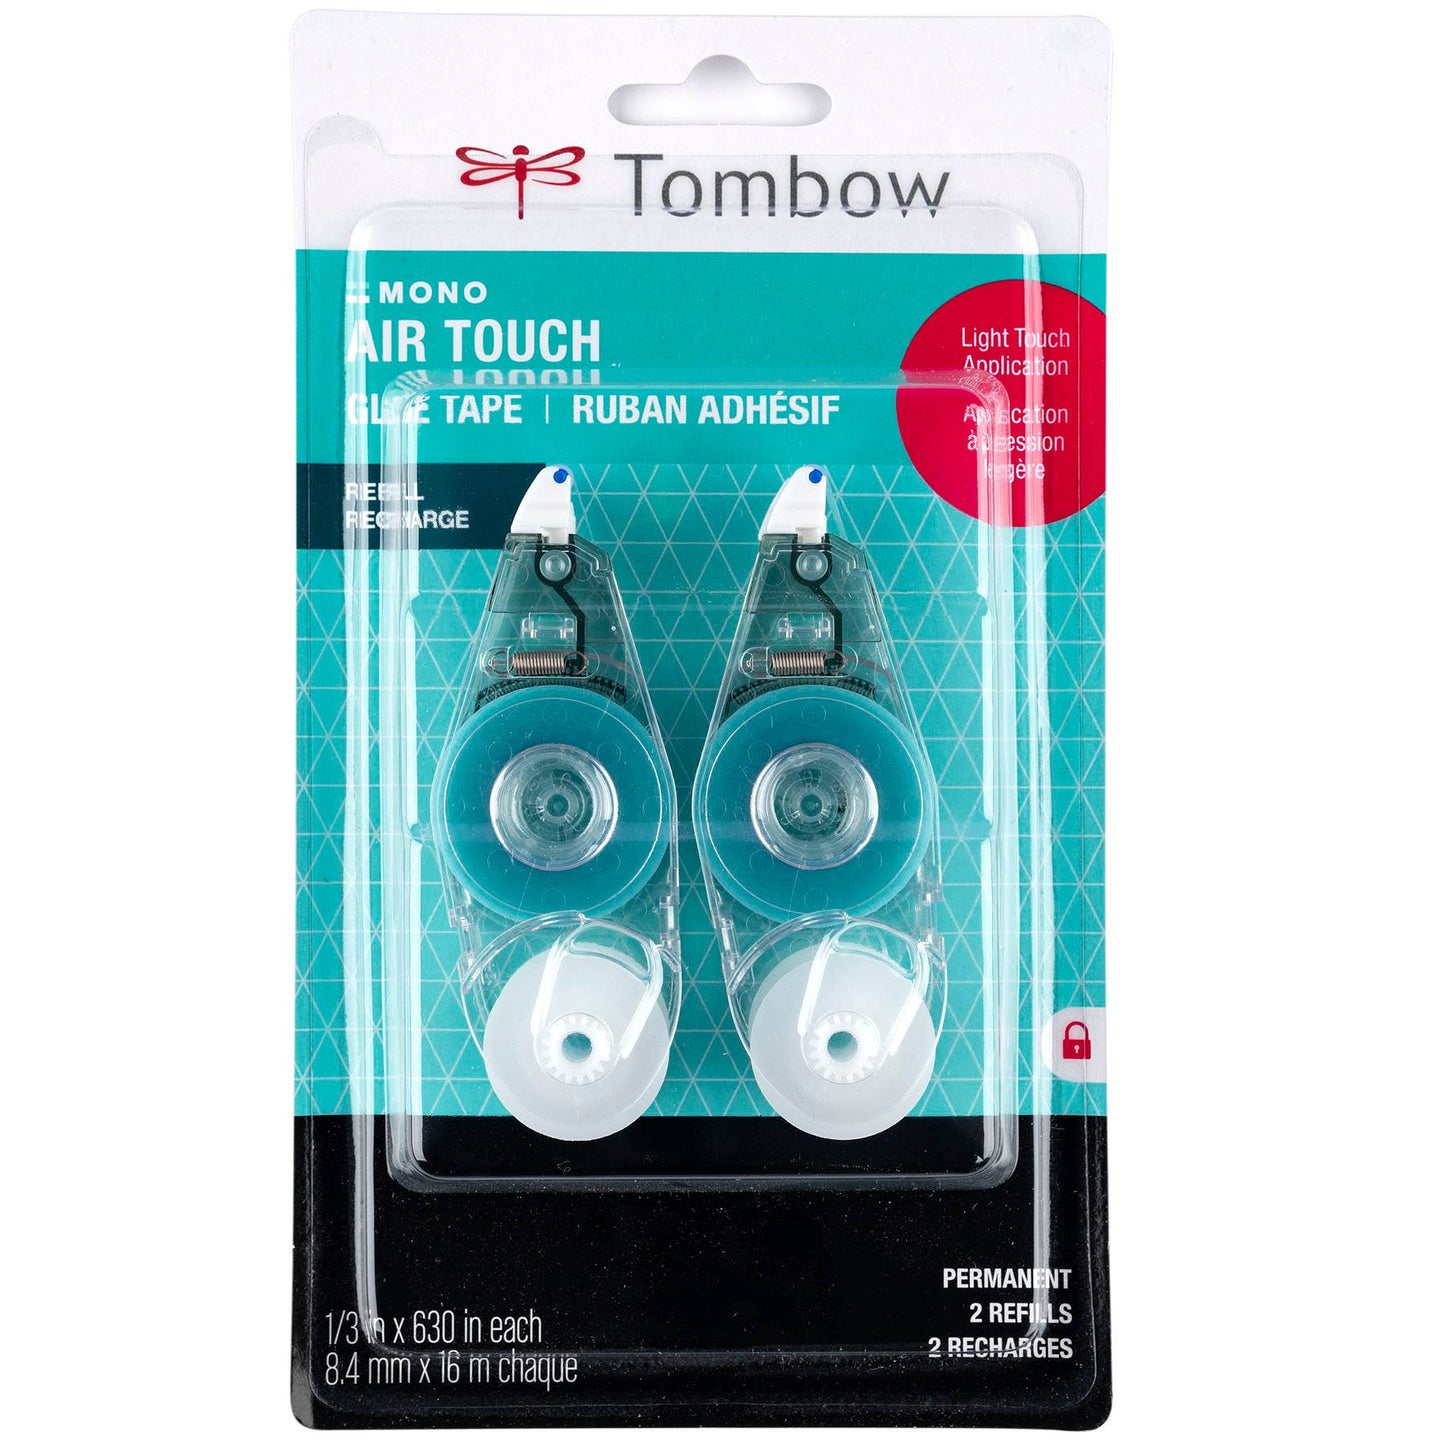 Tombow - MONO Air Touch Refill, 2-Pack